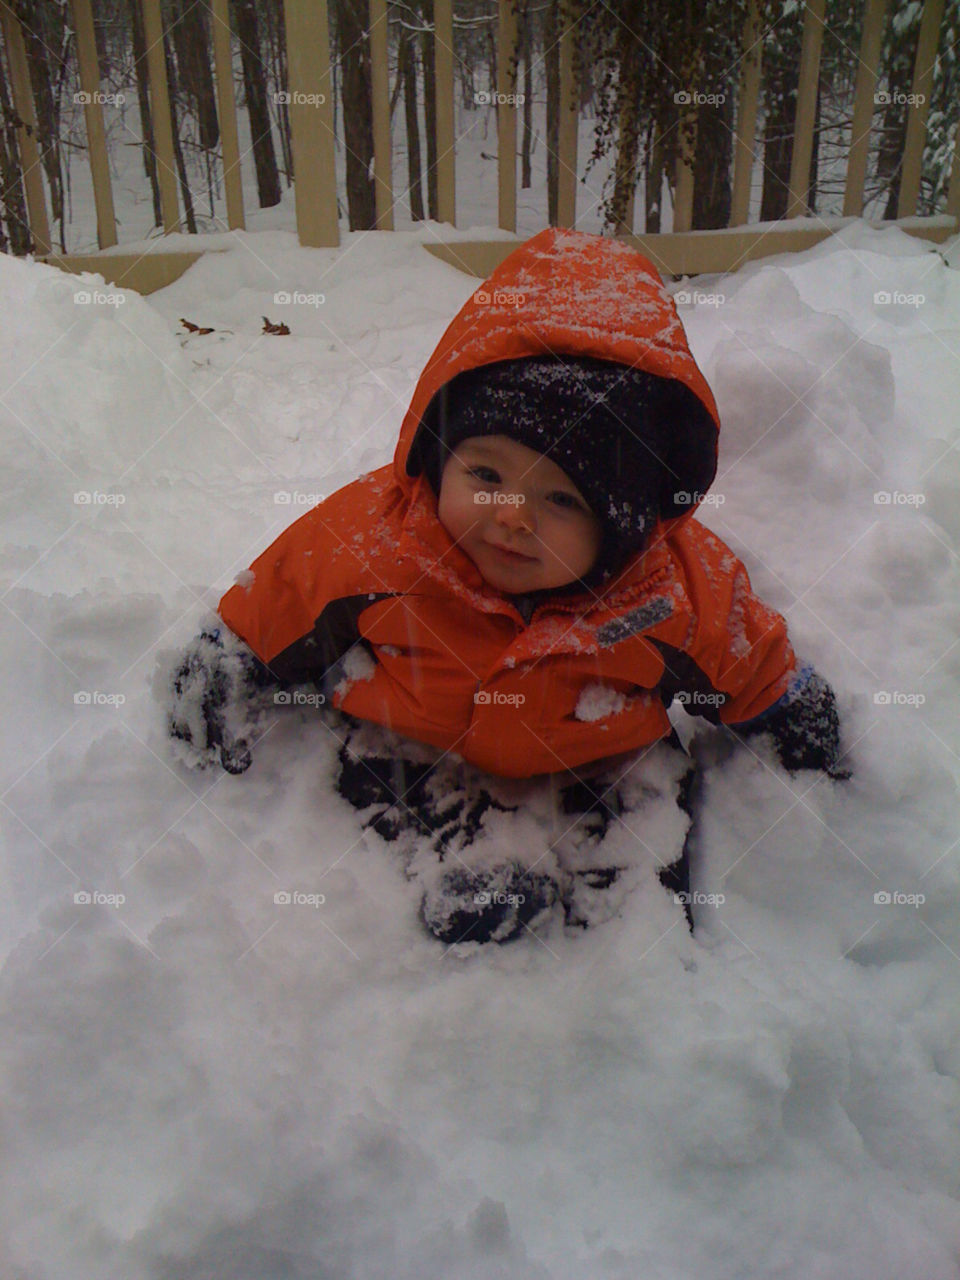 upstate new york snow winter baby by Carnevale